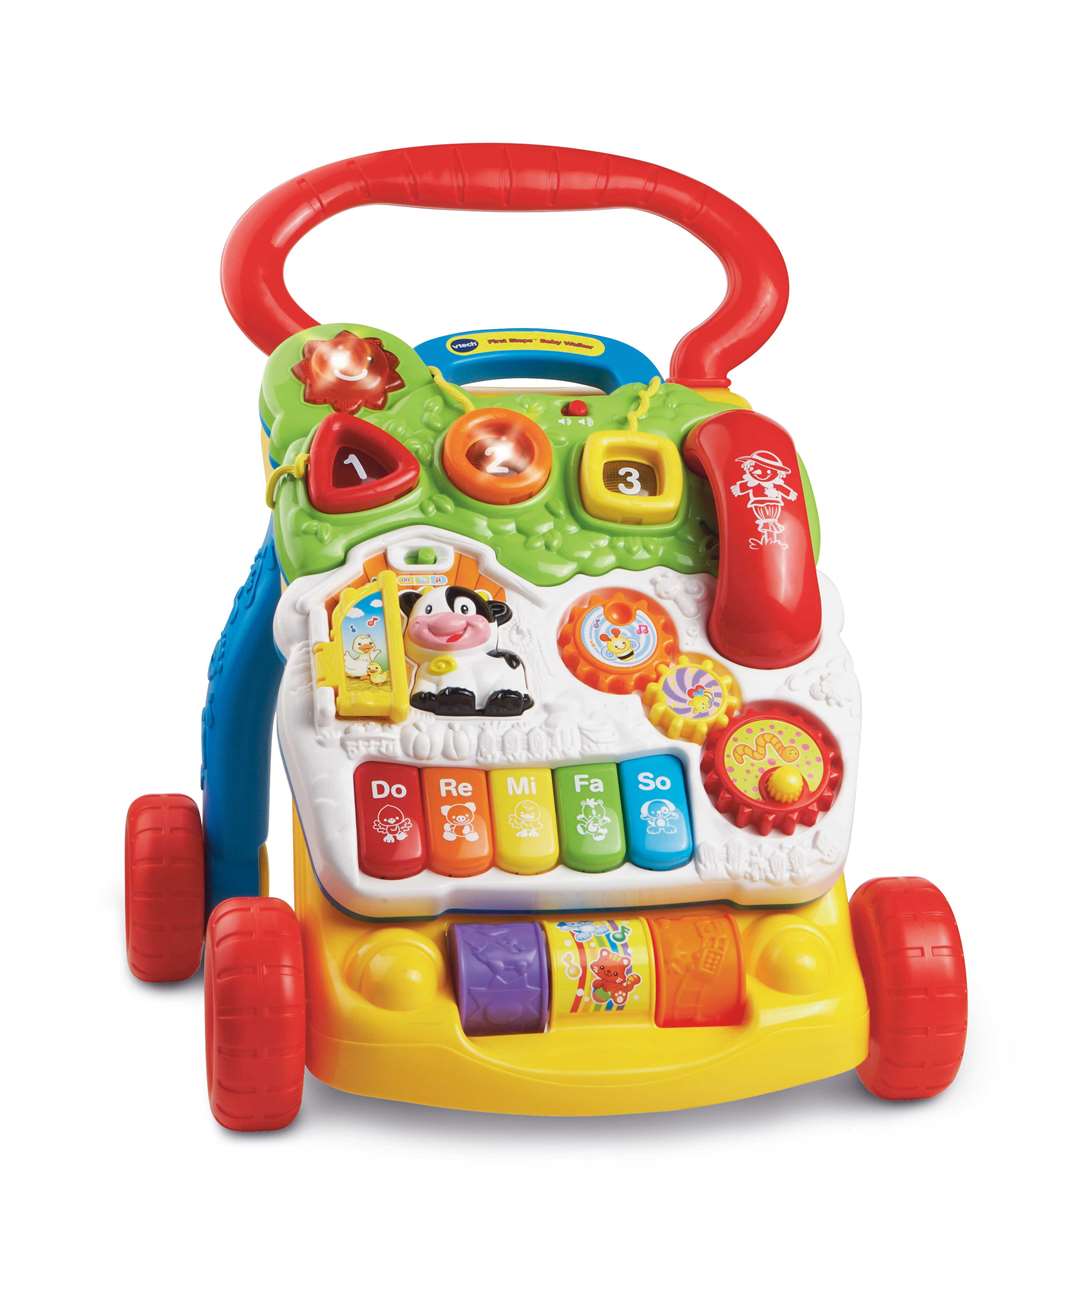 Vtech First Steps Baby Walker - £24.99 - 6m-2 years